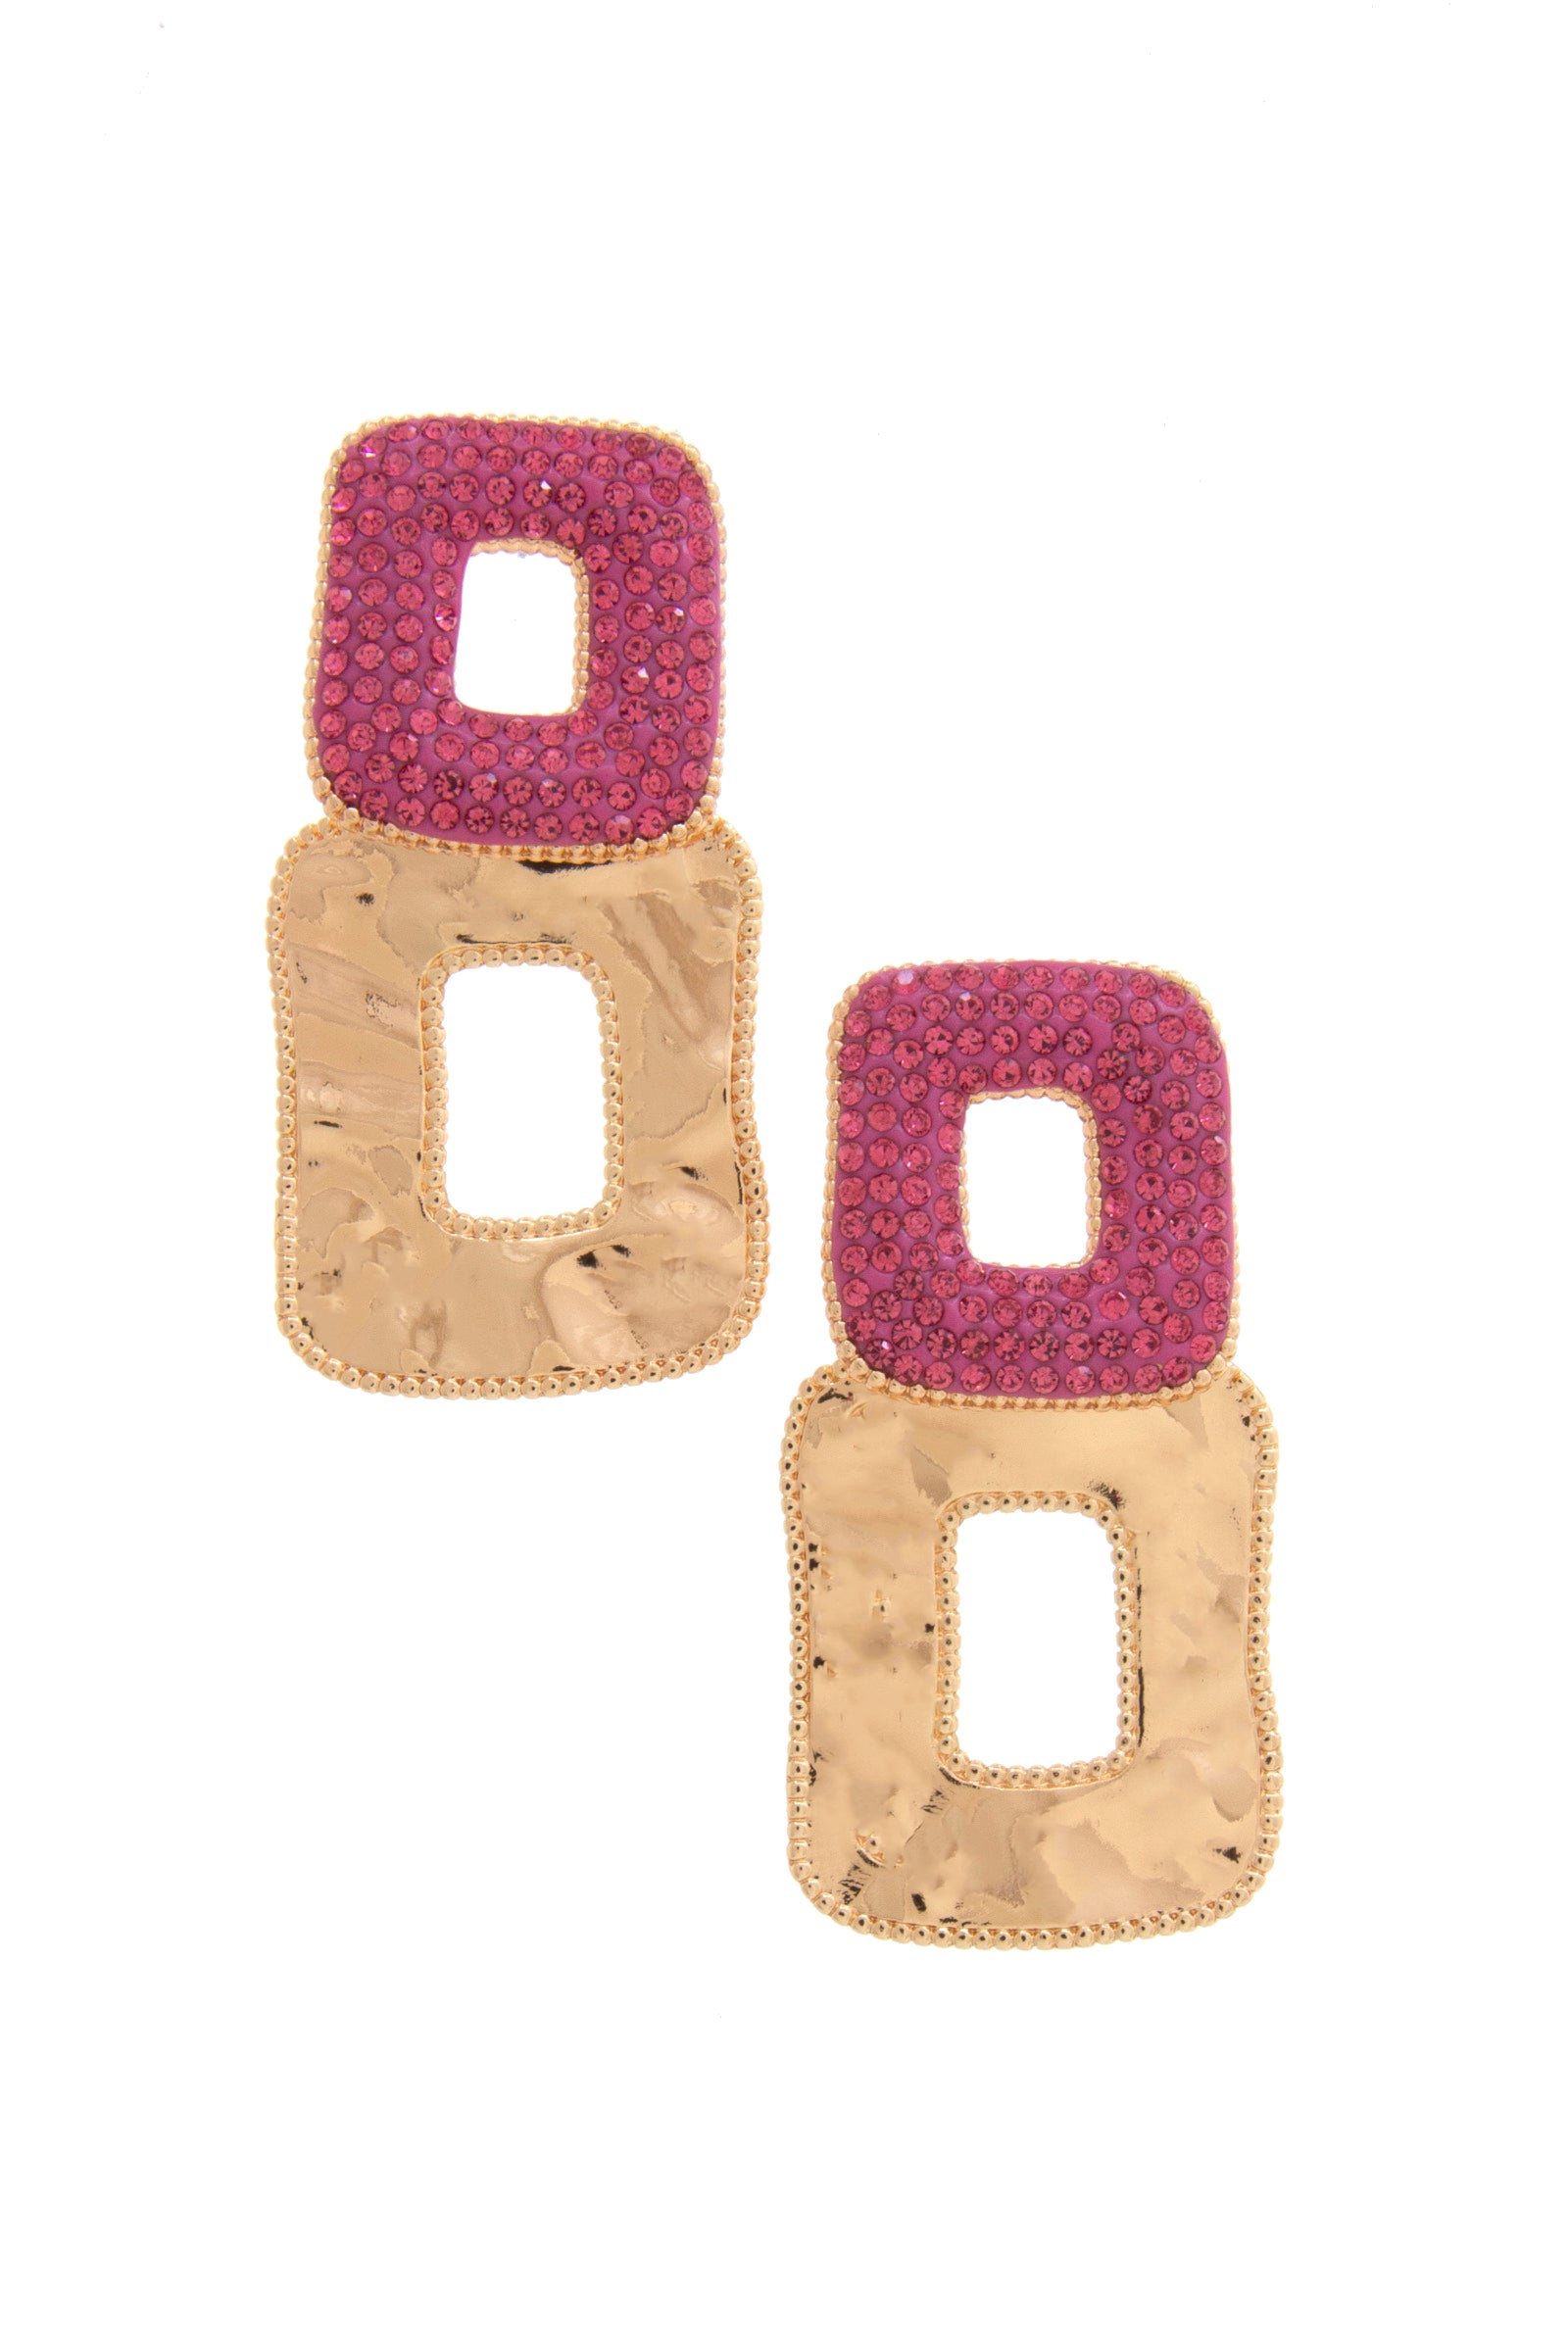 Double Square Rhinestone Post Earring - Wholesale Apparel Center